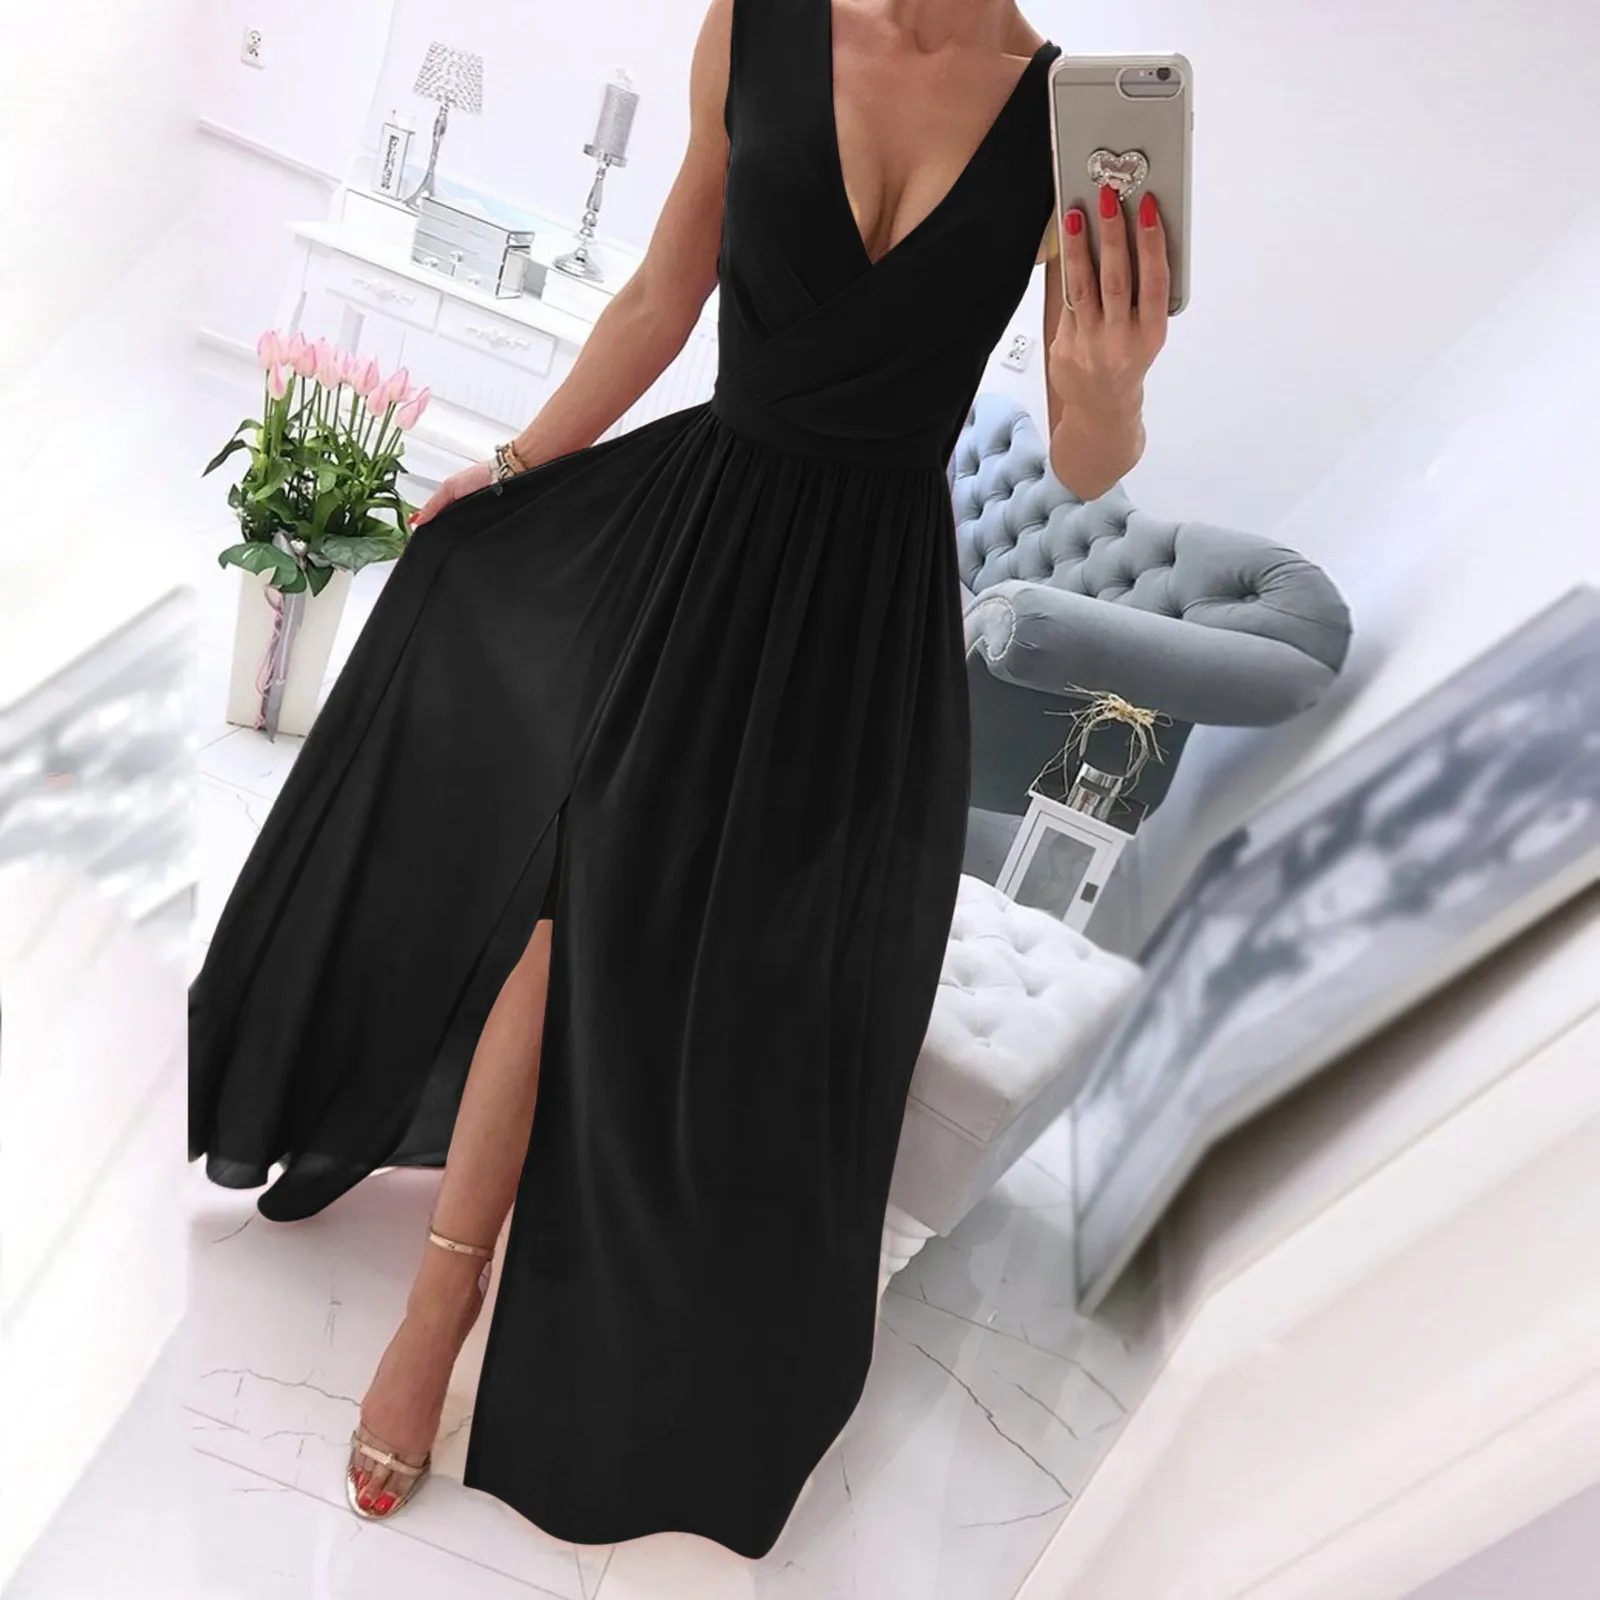 

Women's Casual Dresses Fashion Solid Color Sleeveless V Neck Side Slit A-Line White Dress Vintage Slim Ruched Party Prom Dress